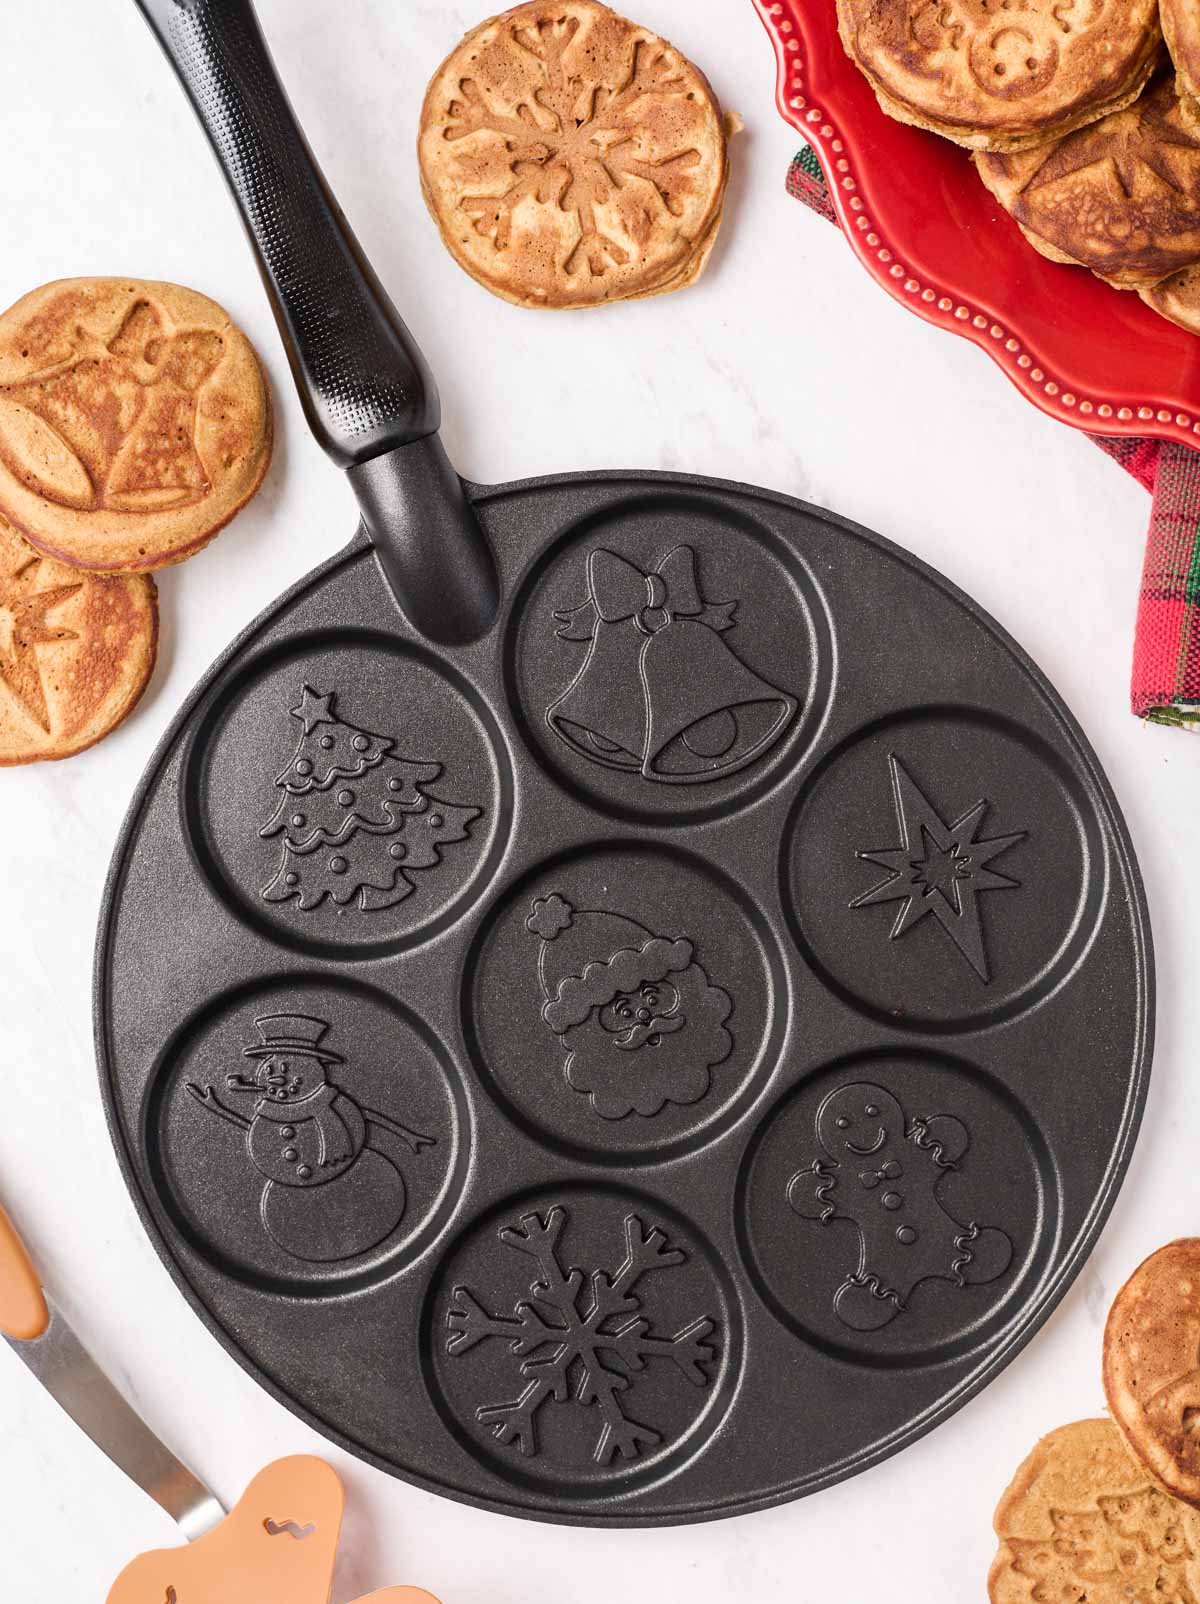 Speciality pancake pan with winter and Christmas desings by Nordic Ware